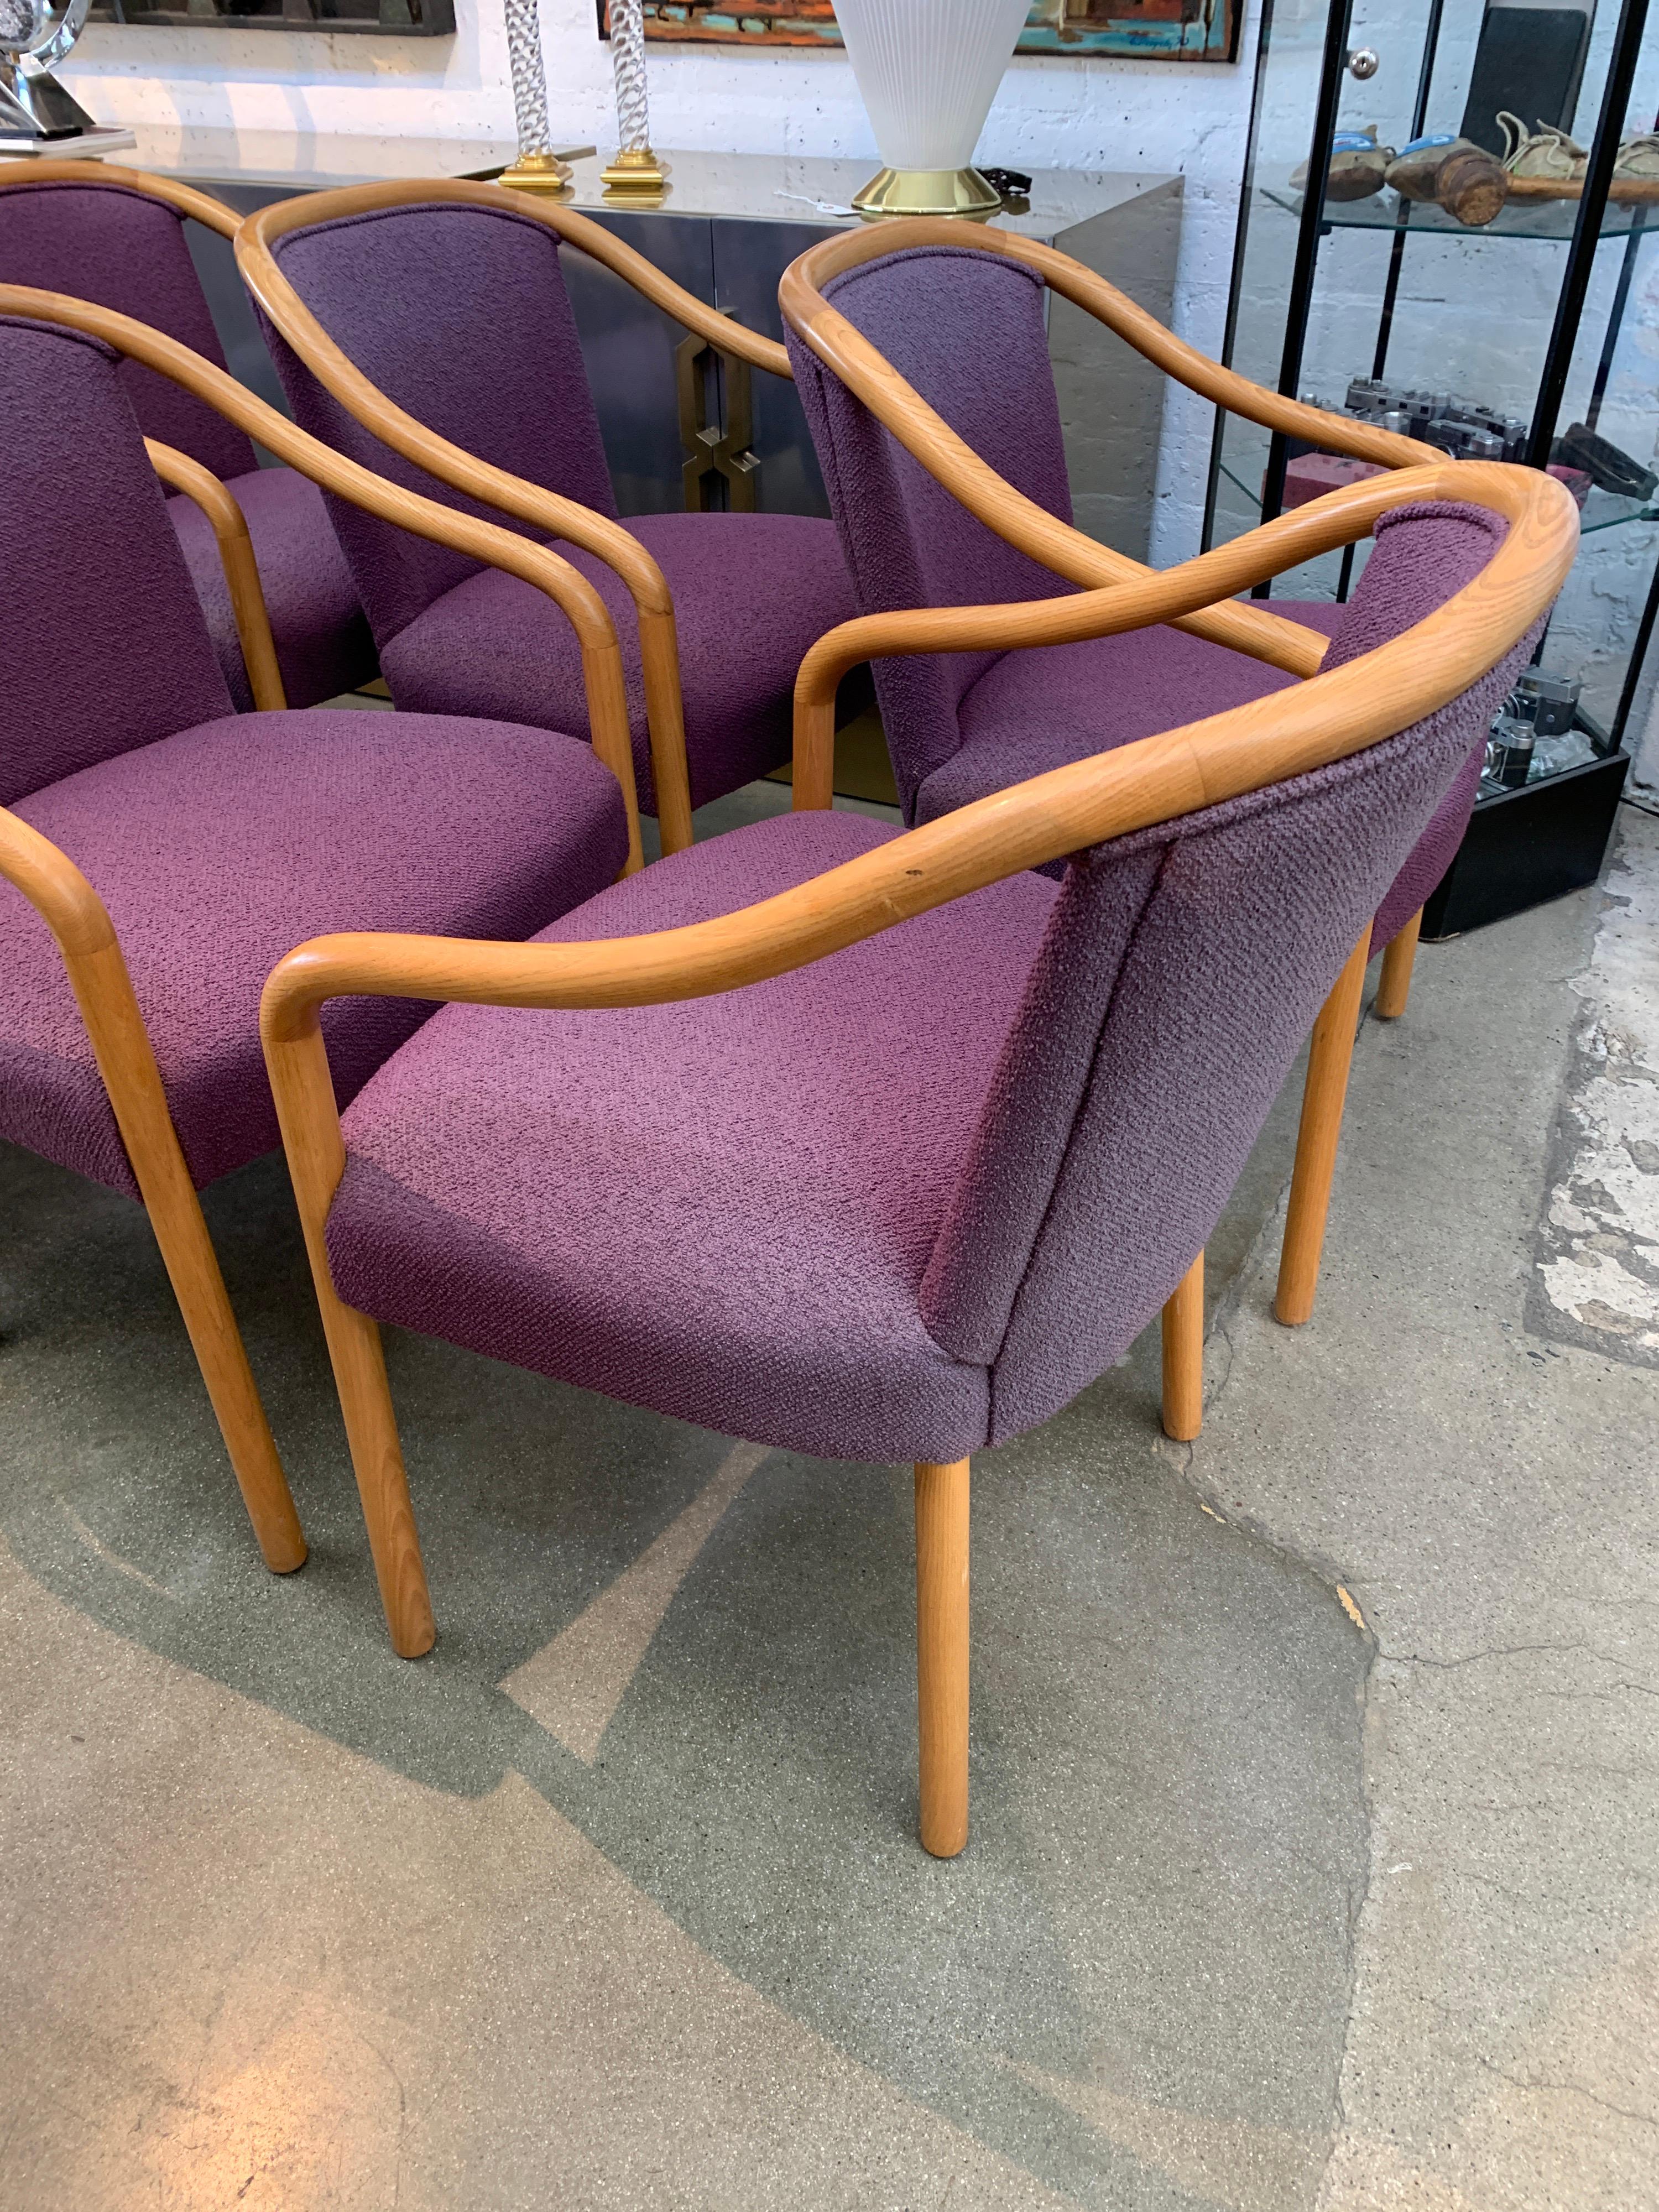 Late 20th Century 8 Dining Chairs by Brickel Associates for Arthur Elrod in Plum